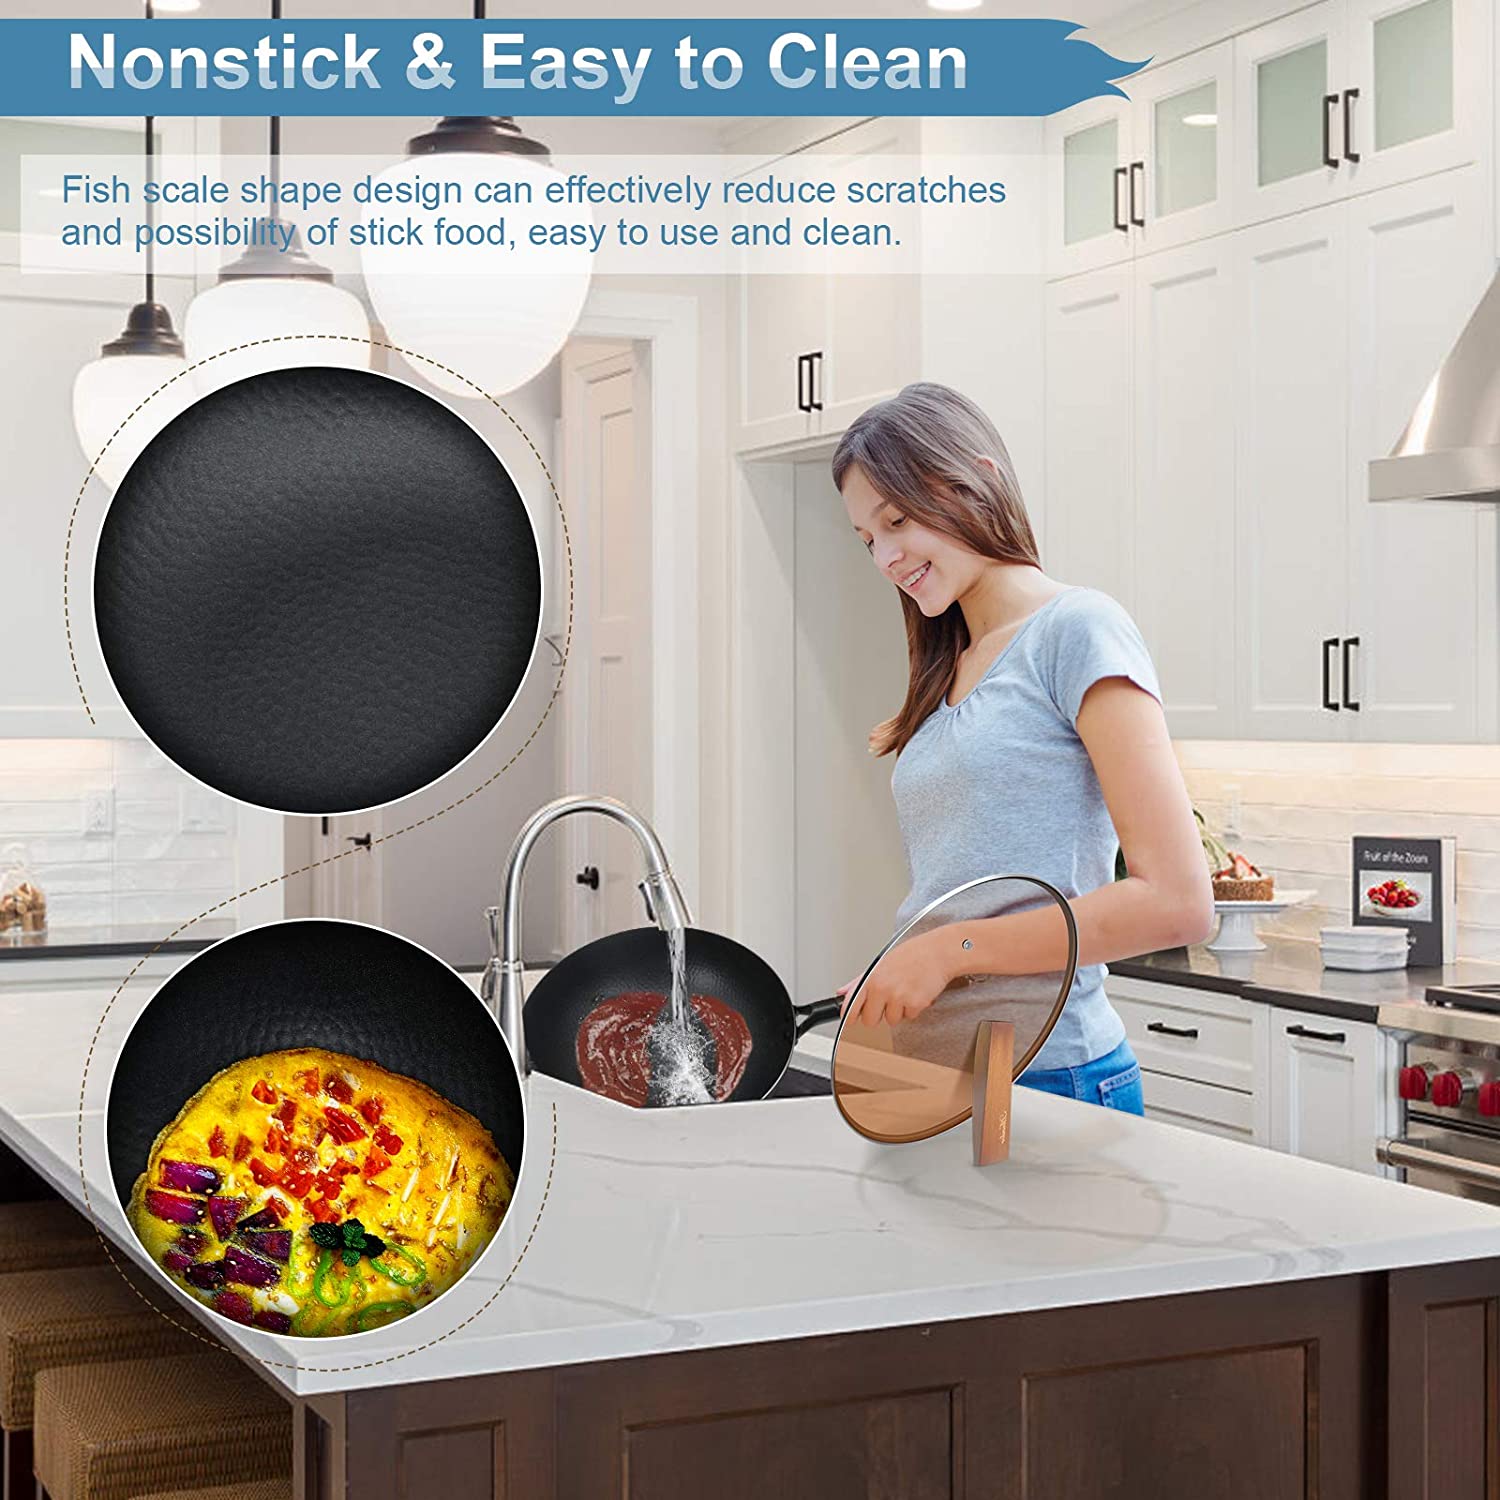 Iron Wok Traditional 12.5 Carbon Steel Wok Non-stick Pan Woks and Stir Fry  Pans with lid Kitchen Cookwar for All Stoves